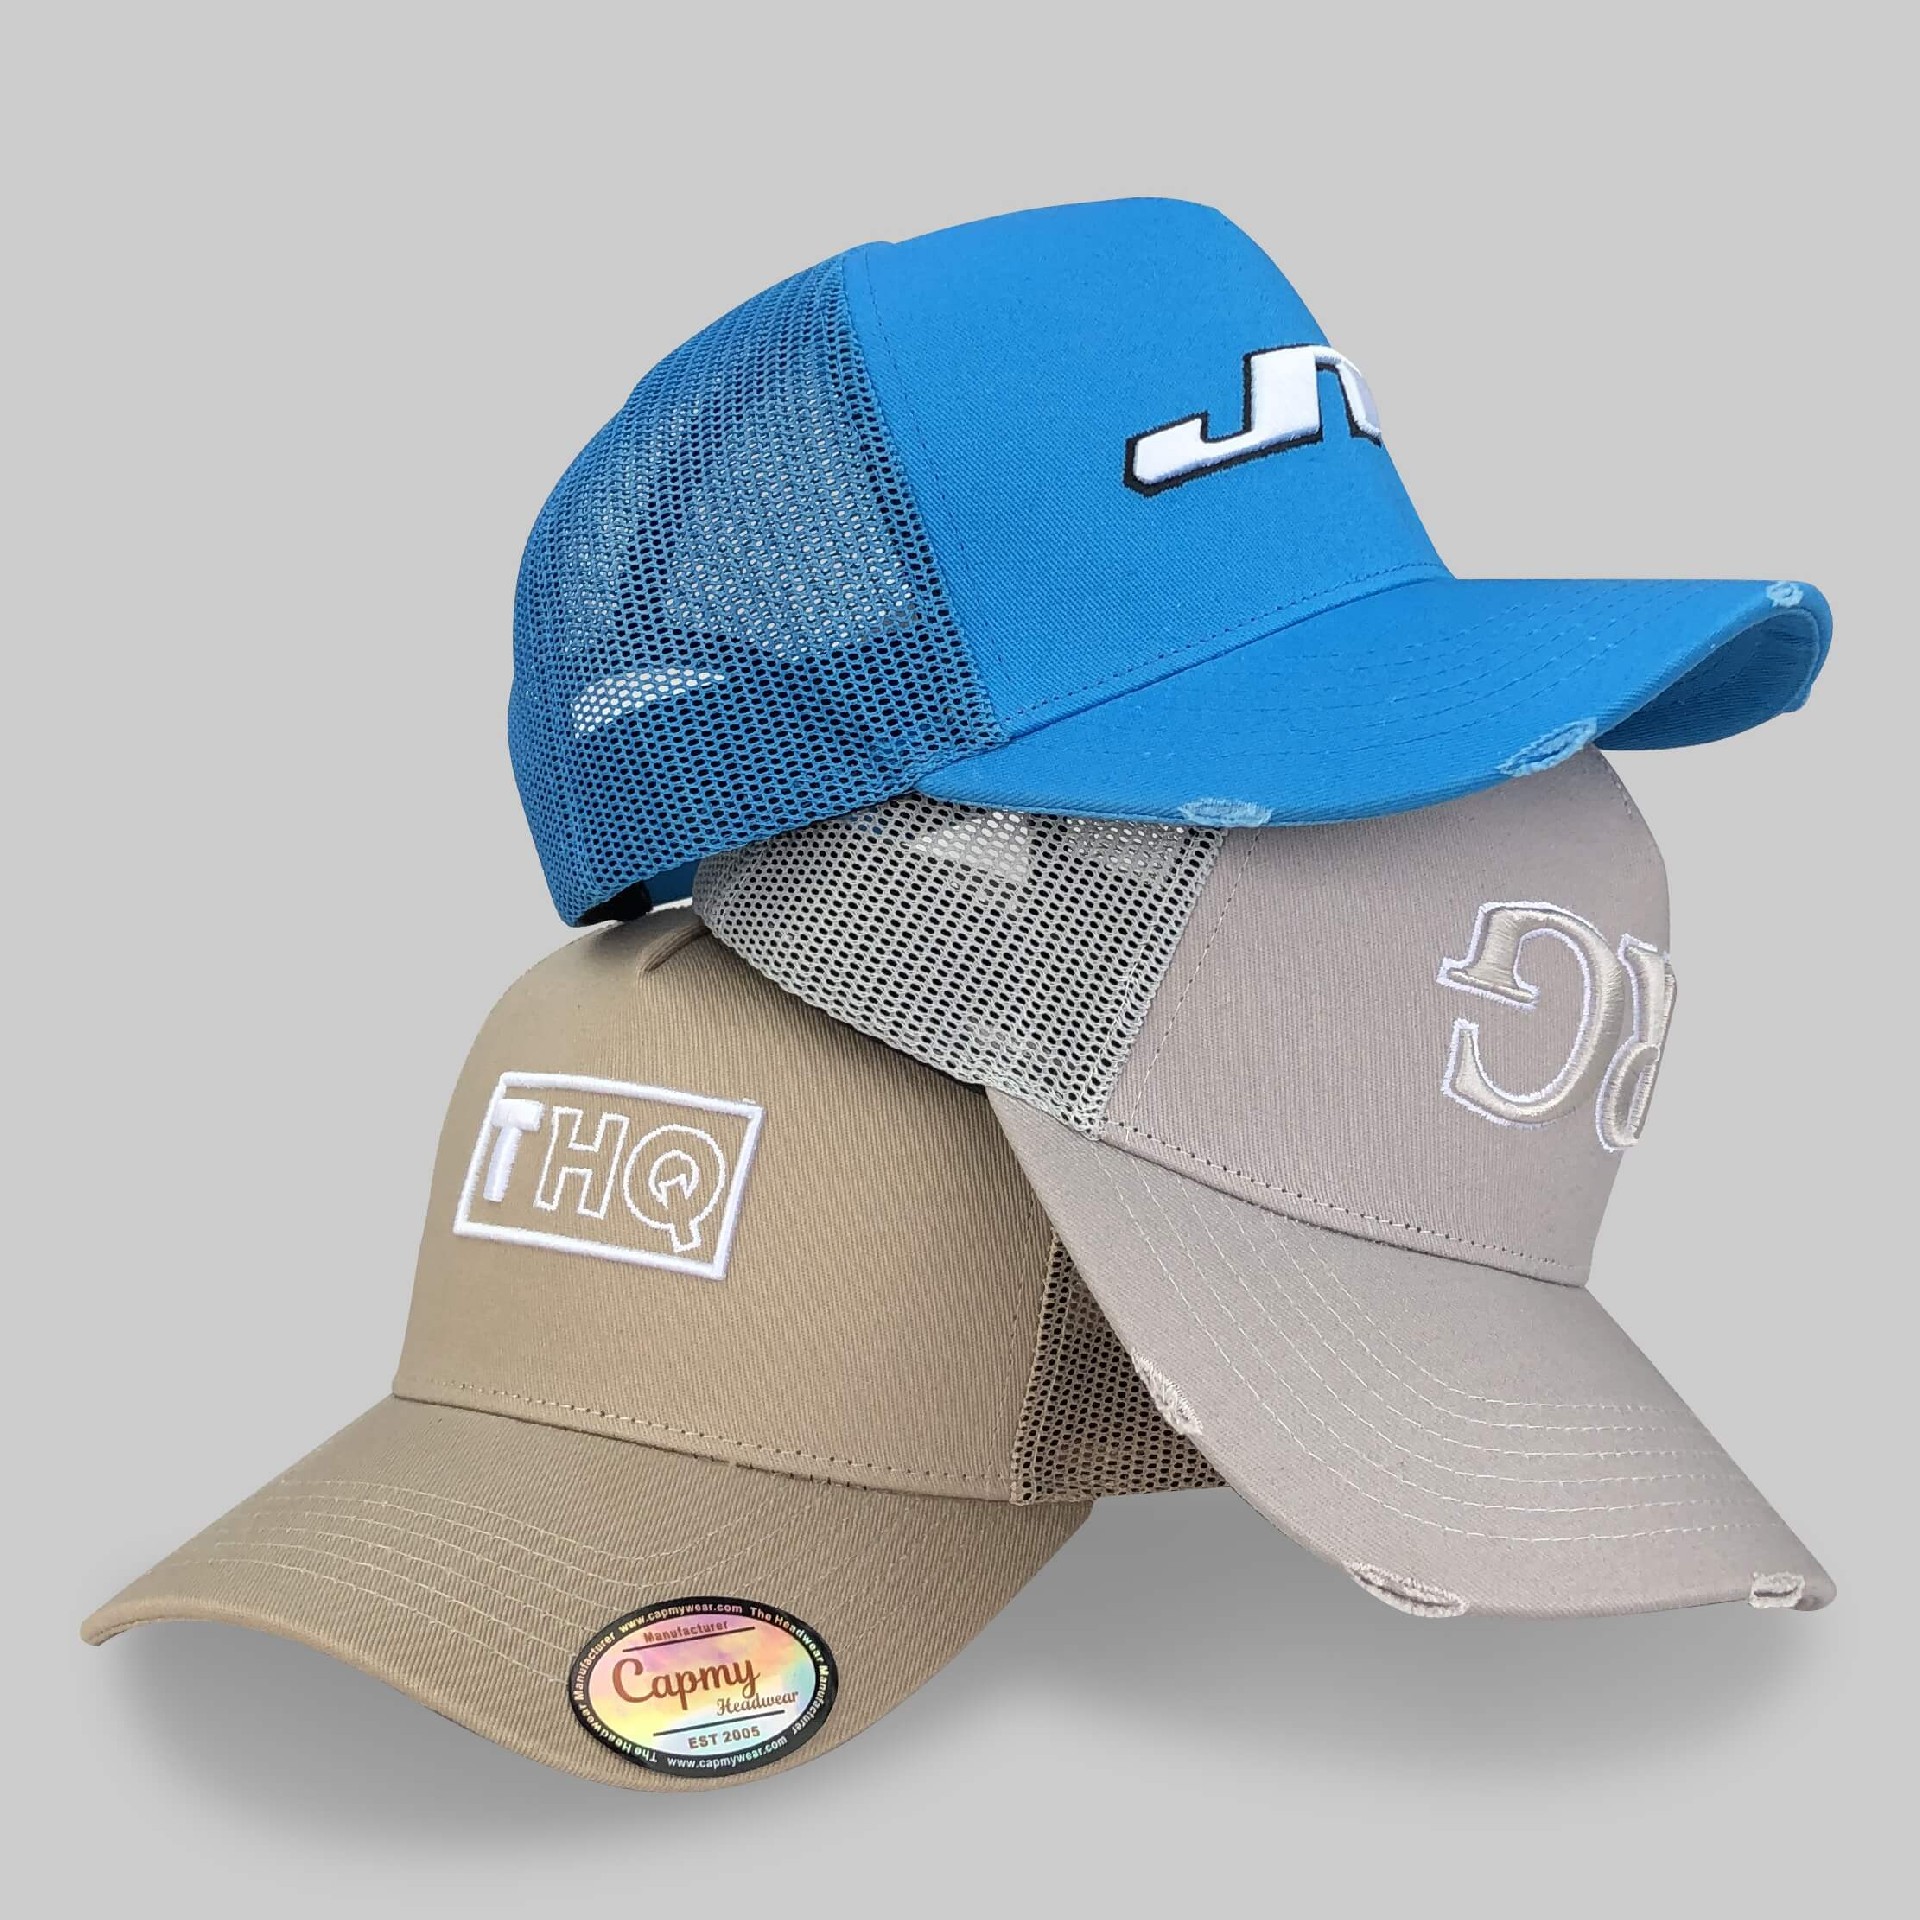 CMC-3132(Yelir Shape High Quality 5 Panel Structured Mesh Distressed Vintage Rip Blue Trucker Hat Factory)